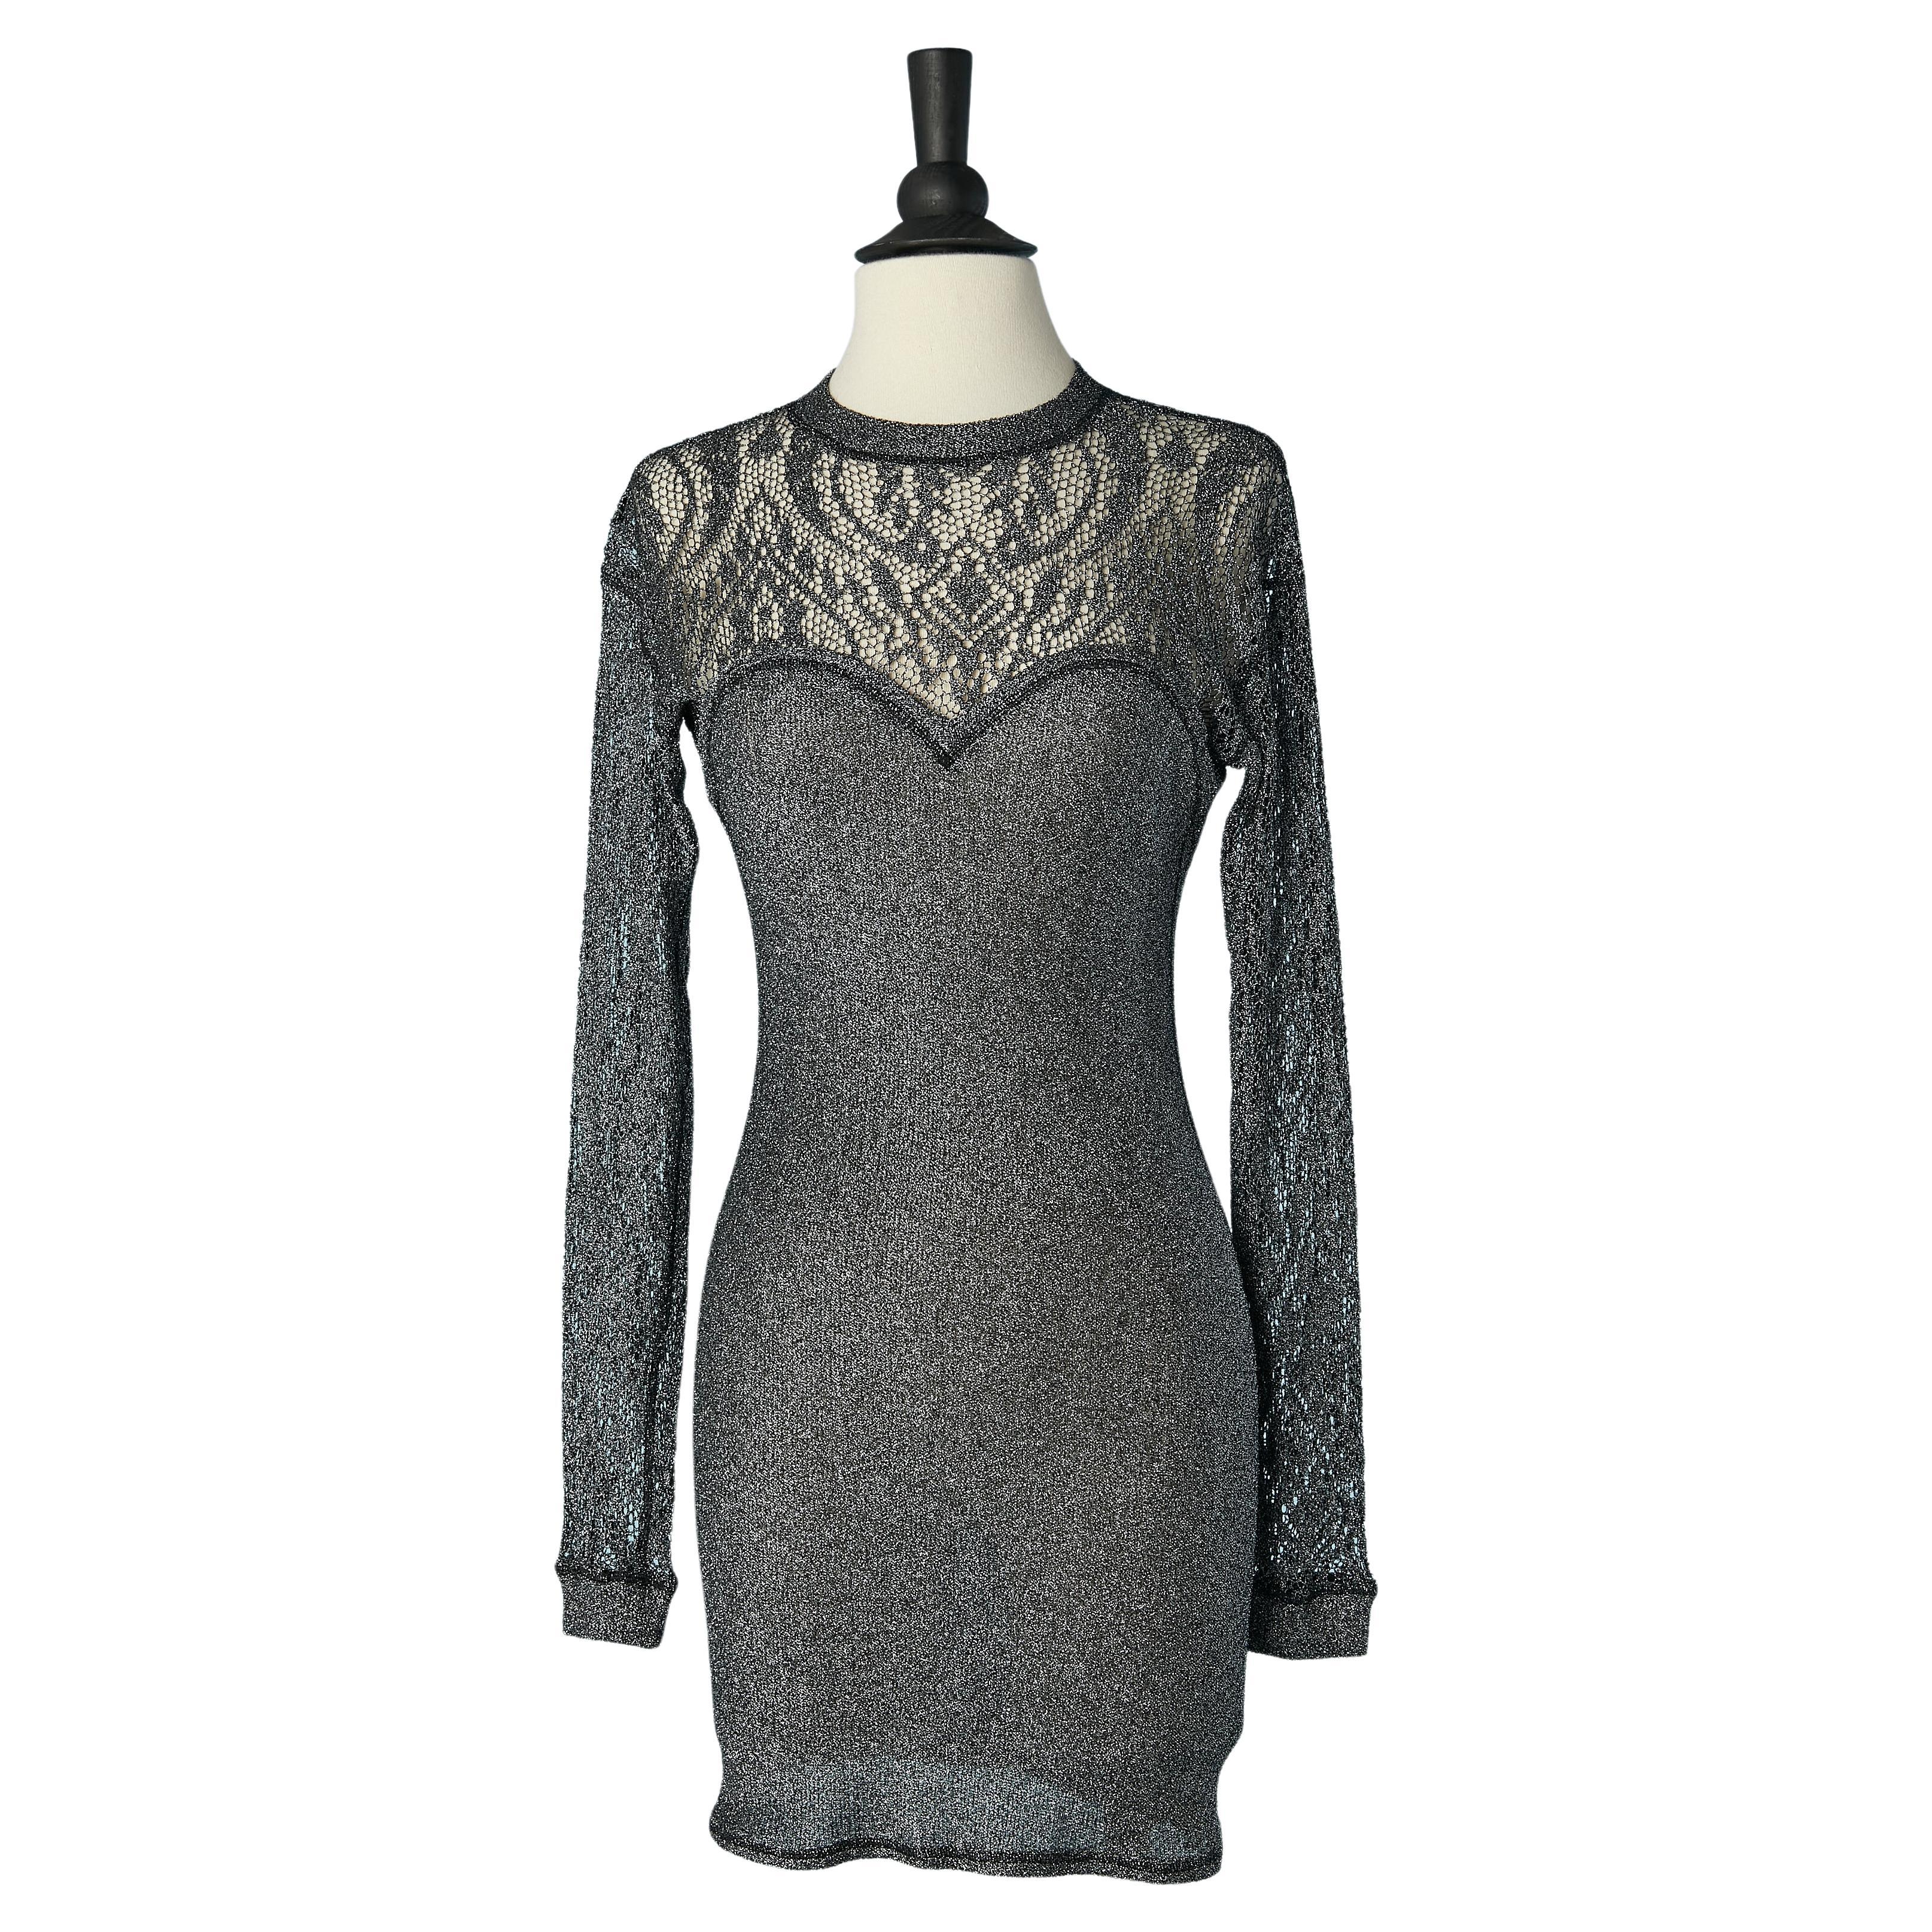 Silver lurex knit and lace cocktail dress Chantal THOMASS Circa 1990's  For Sale